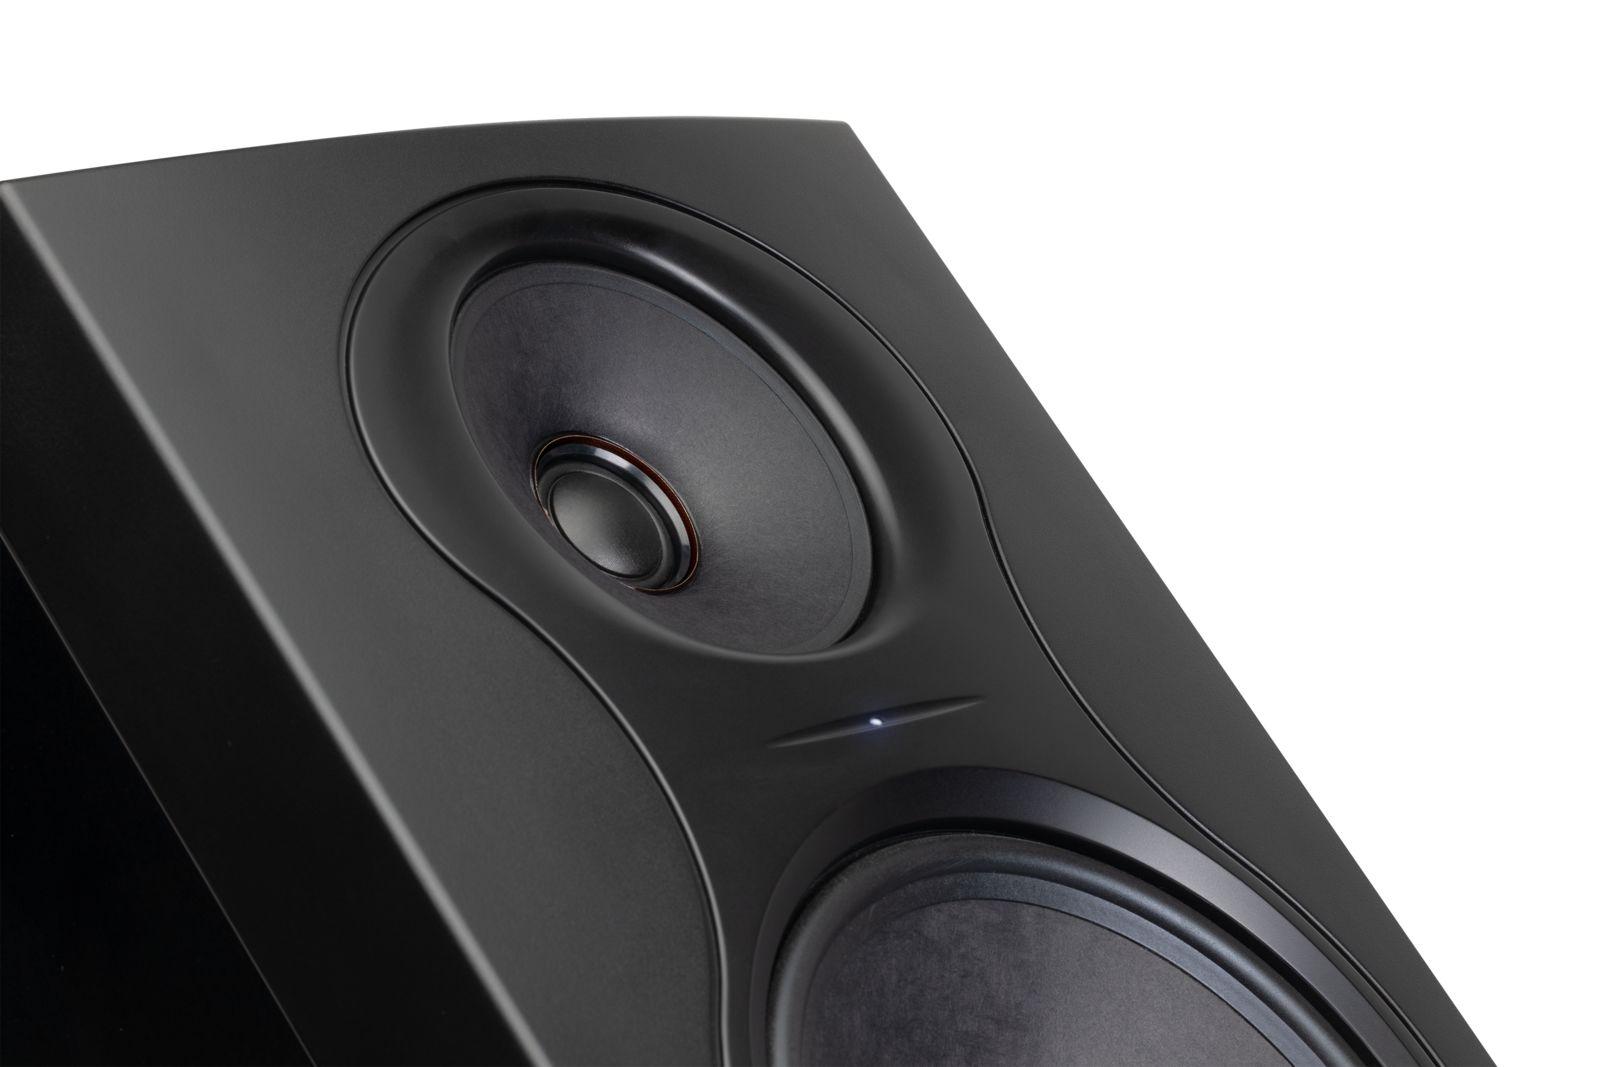 Designed to be studio monitors, the Kali Audio IN-8 V2 speakers are more about performance than aesthetics, but the performance is so good -- especially for the price -- the aesthetics almost don’t matter. kali audio in-8 27e690a3 kali in 8 tweeter 2 medium